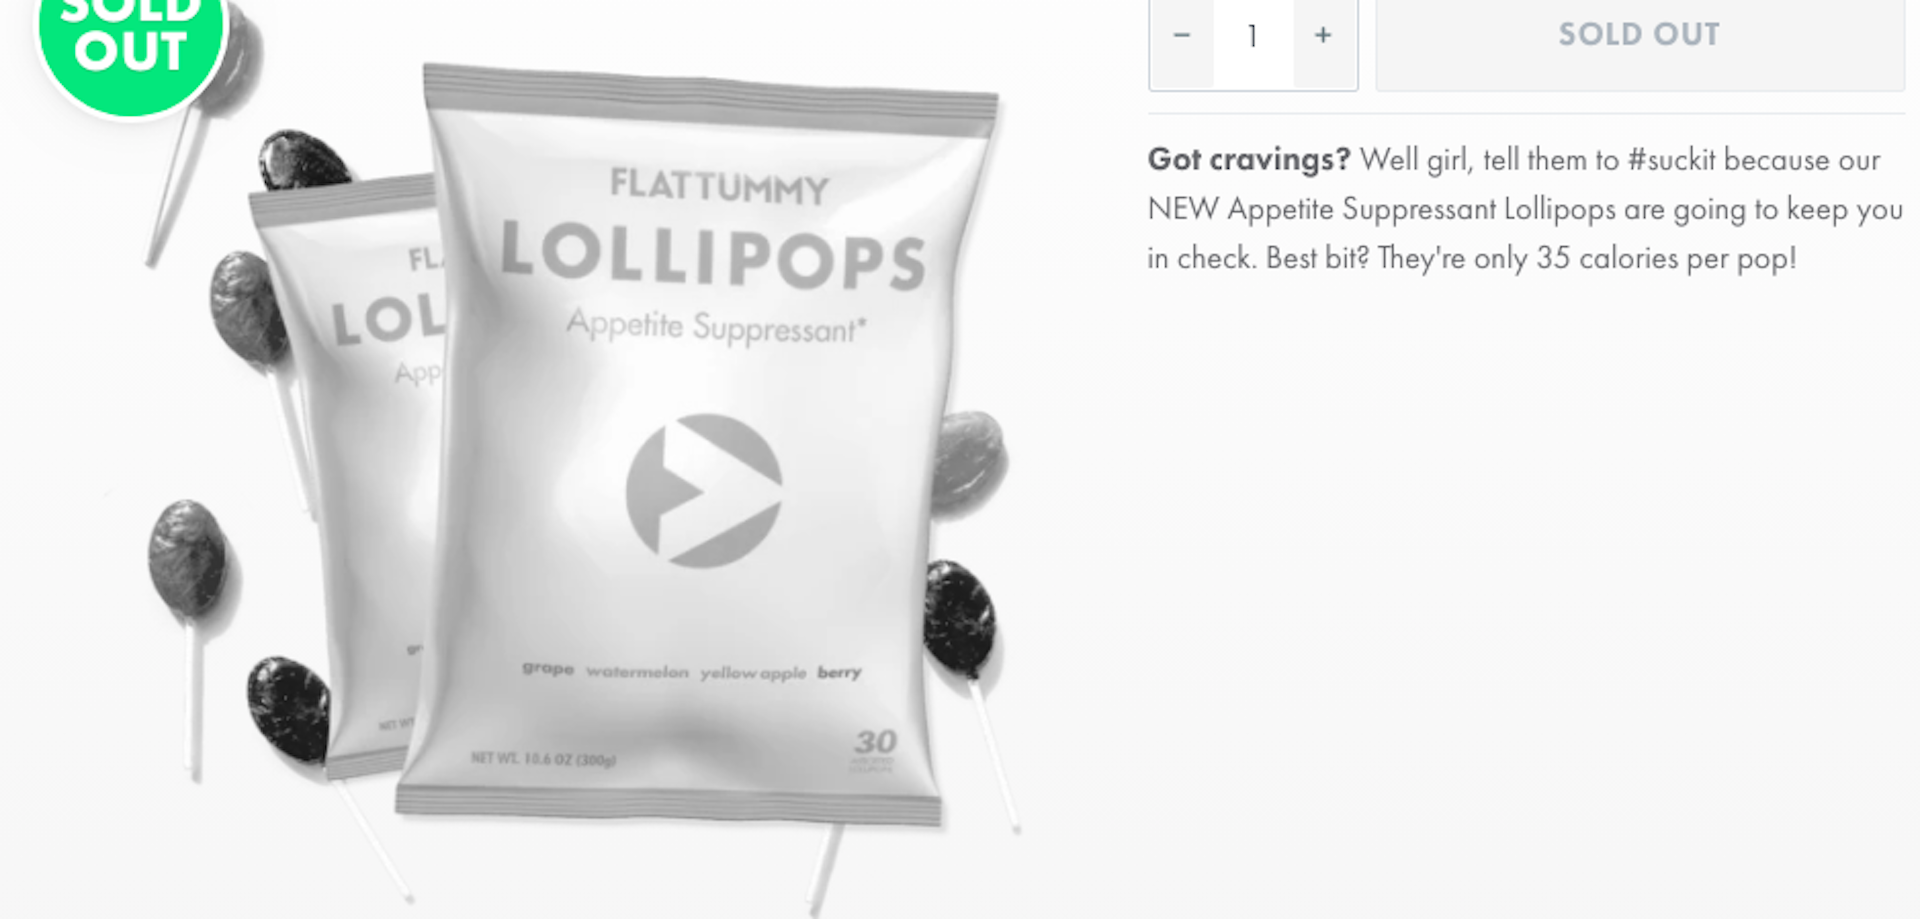 Flat Tummy lollipops, which claim to suppress appetite and improve satiation have been endorsed by Kim Kardashian.